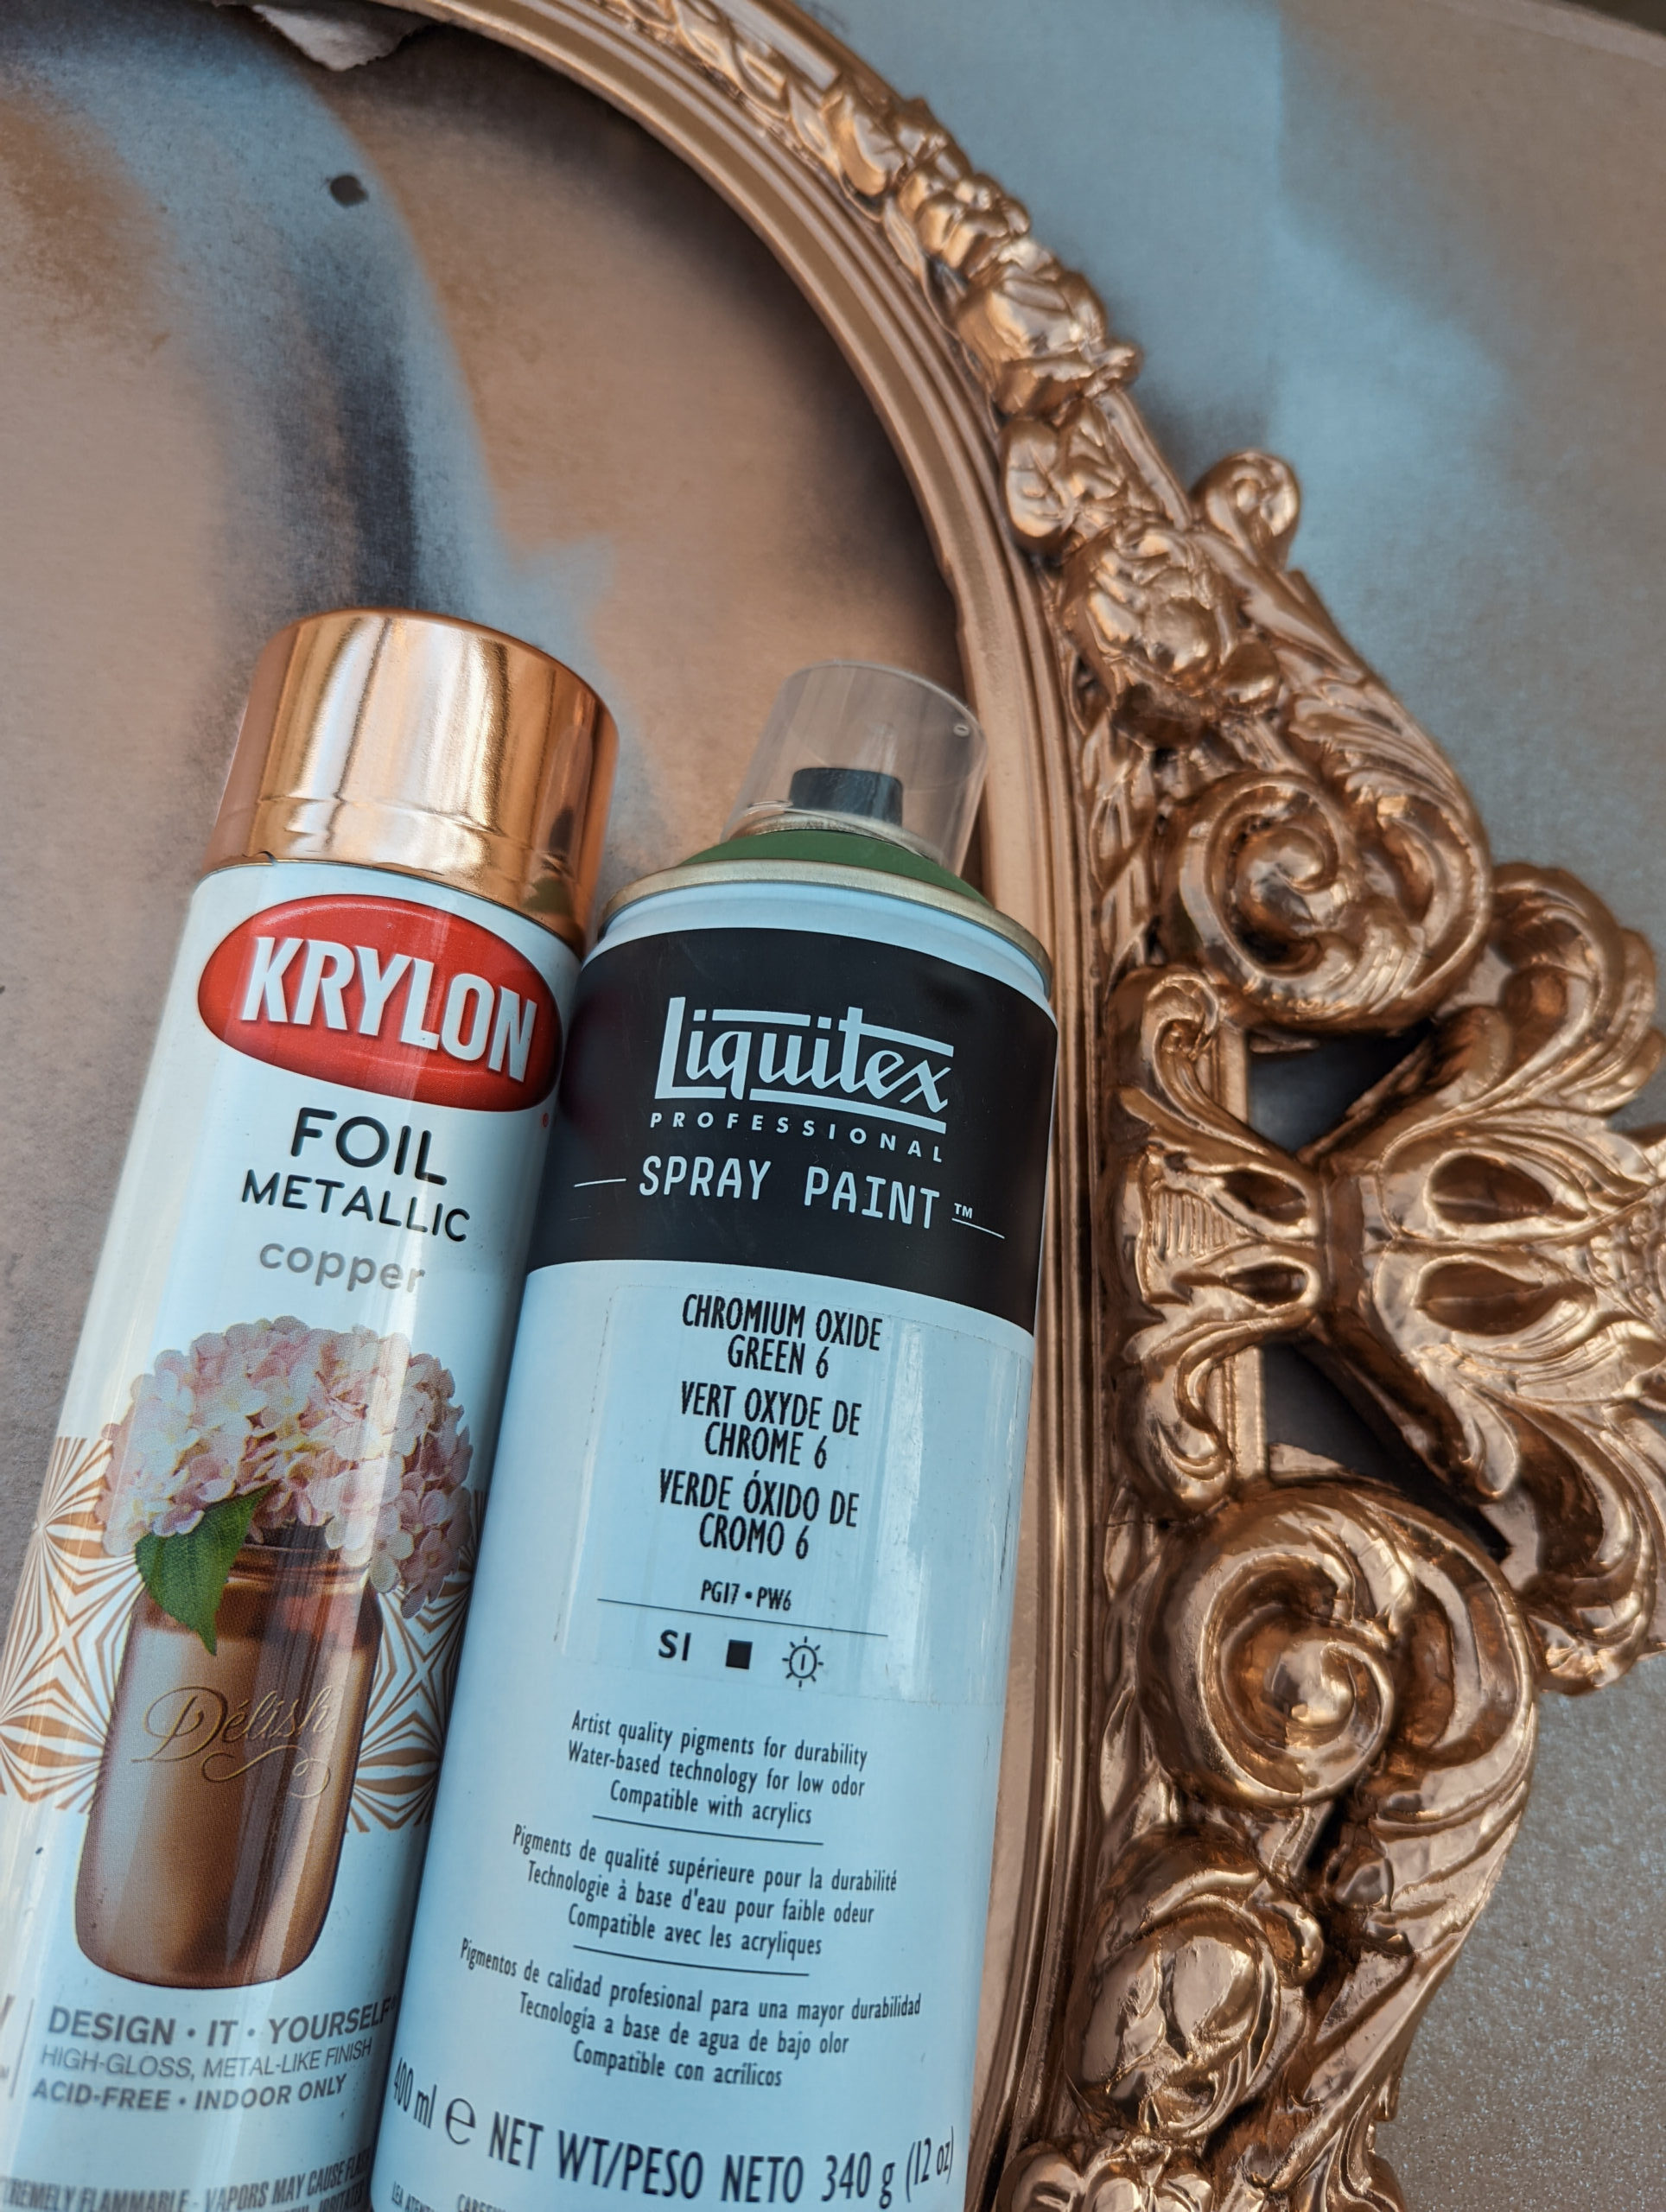 Supplies needed to paint a faux finish copper technique.